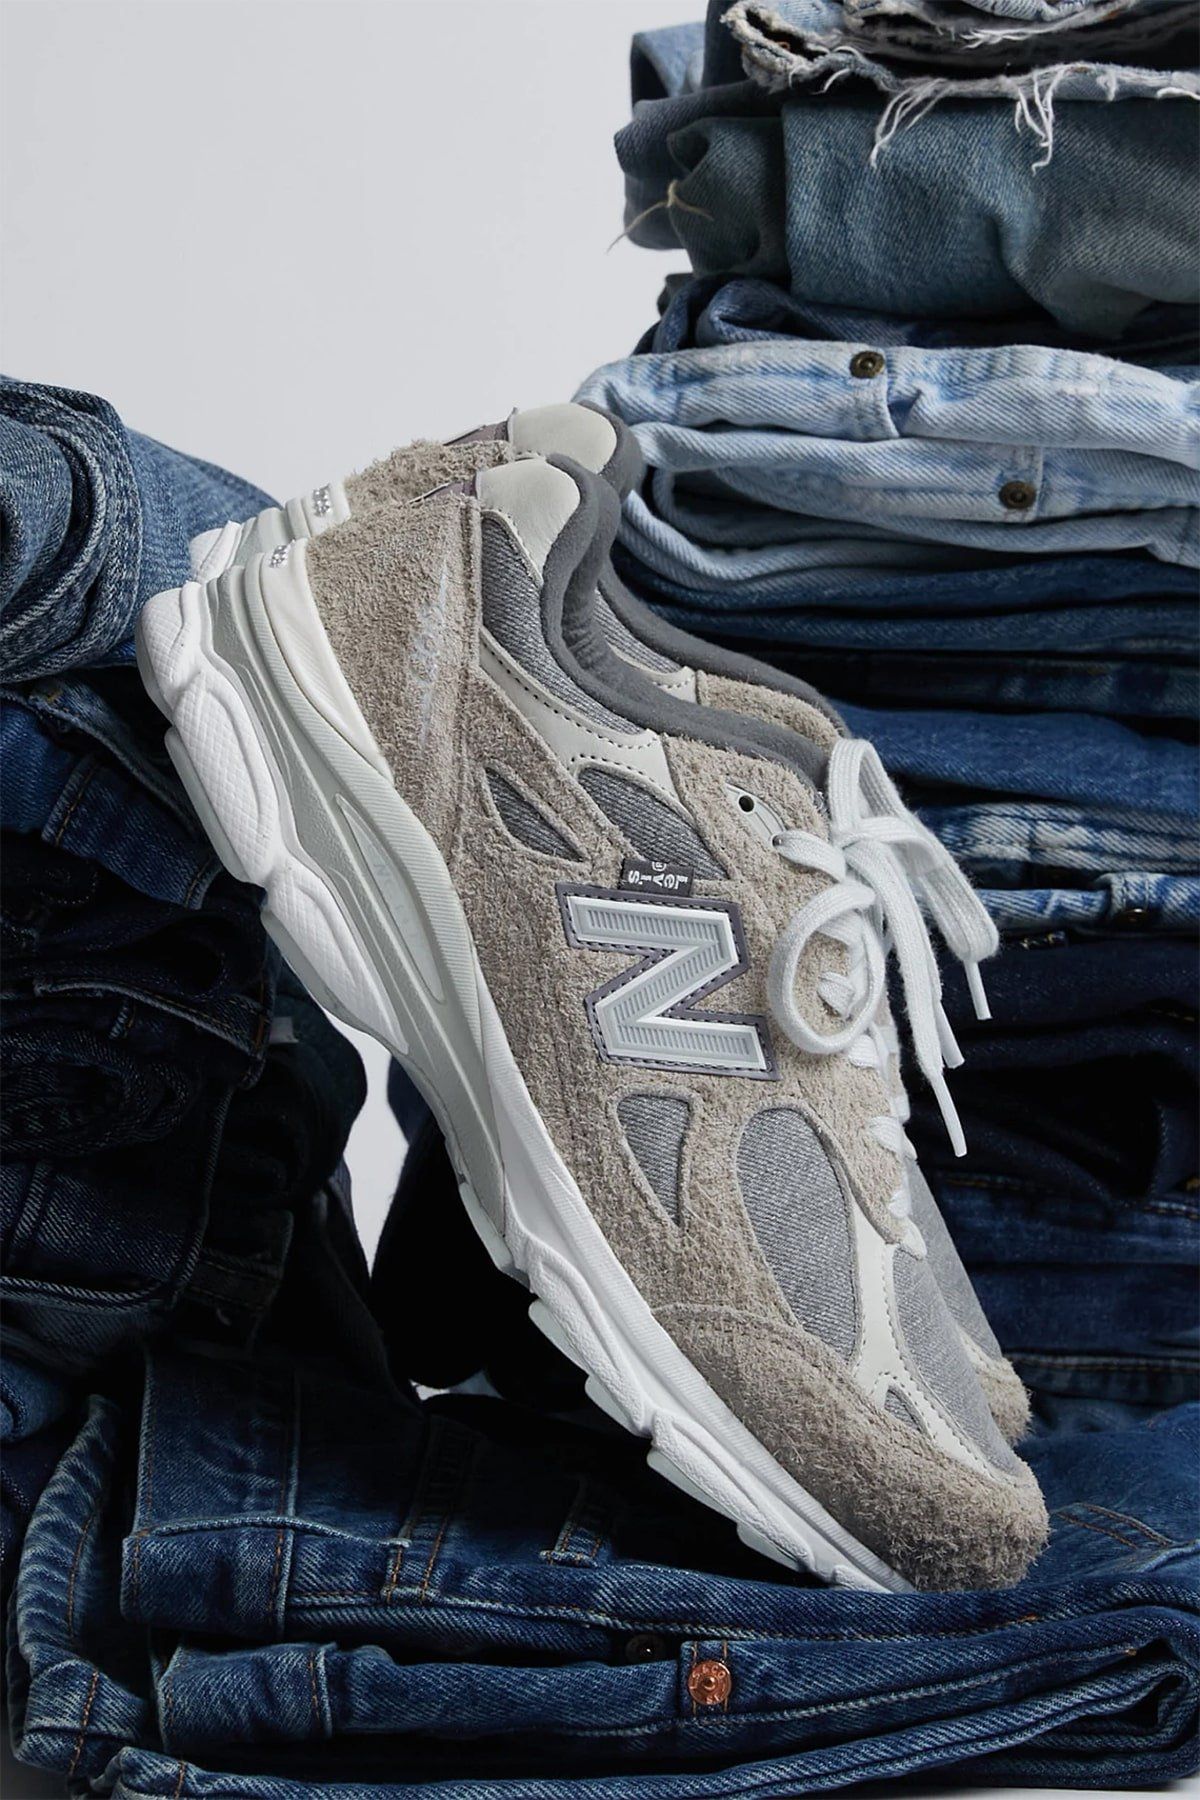 Levi's x New Balance 990v3 Pack Drops September 9th | HOUSE OF HEAT